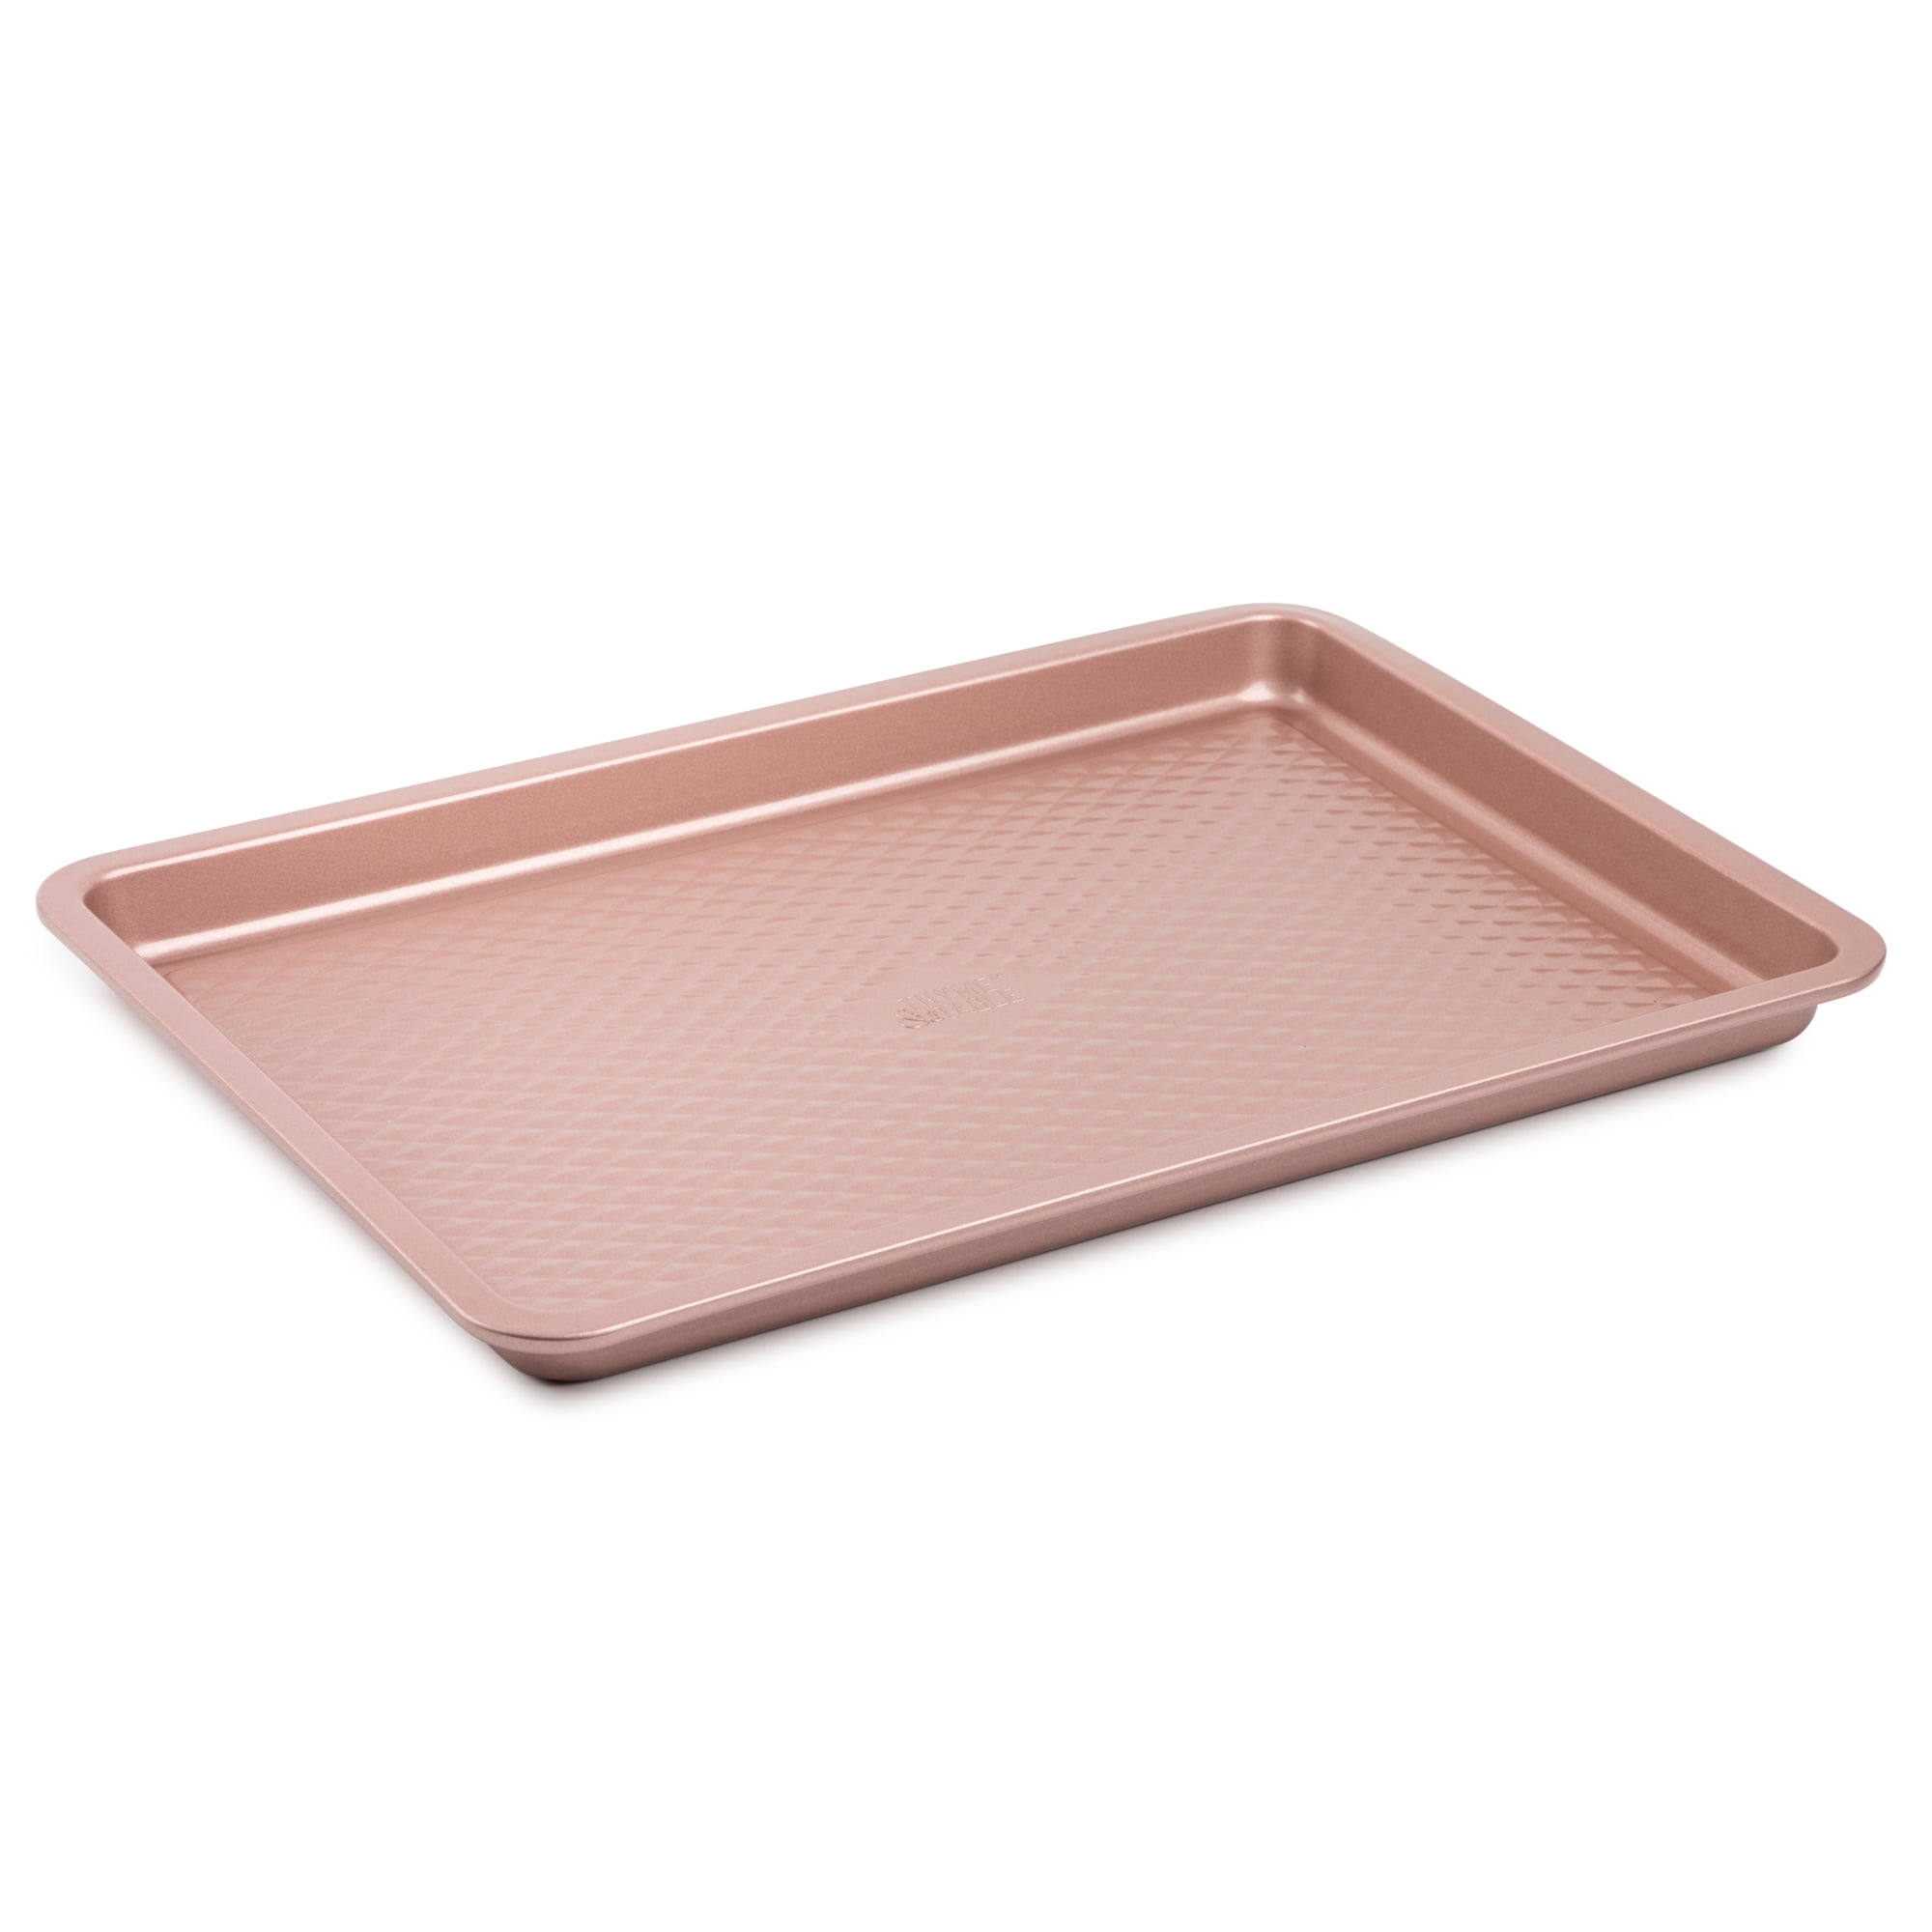 19 Best Jelly Roll Pans of 2023: Reviews & Buying Tips - Far & Away